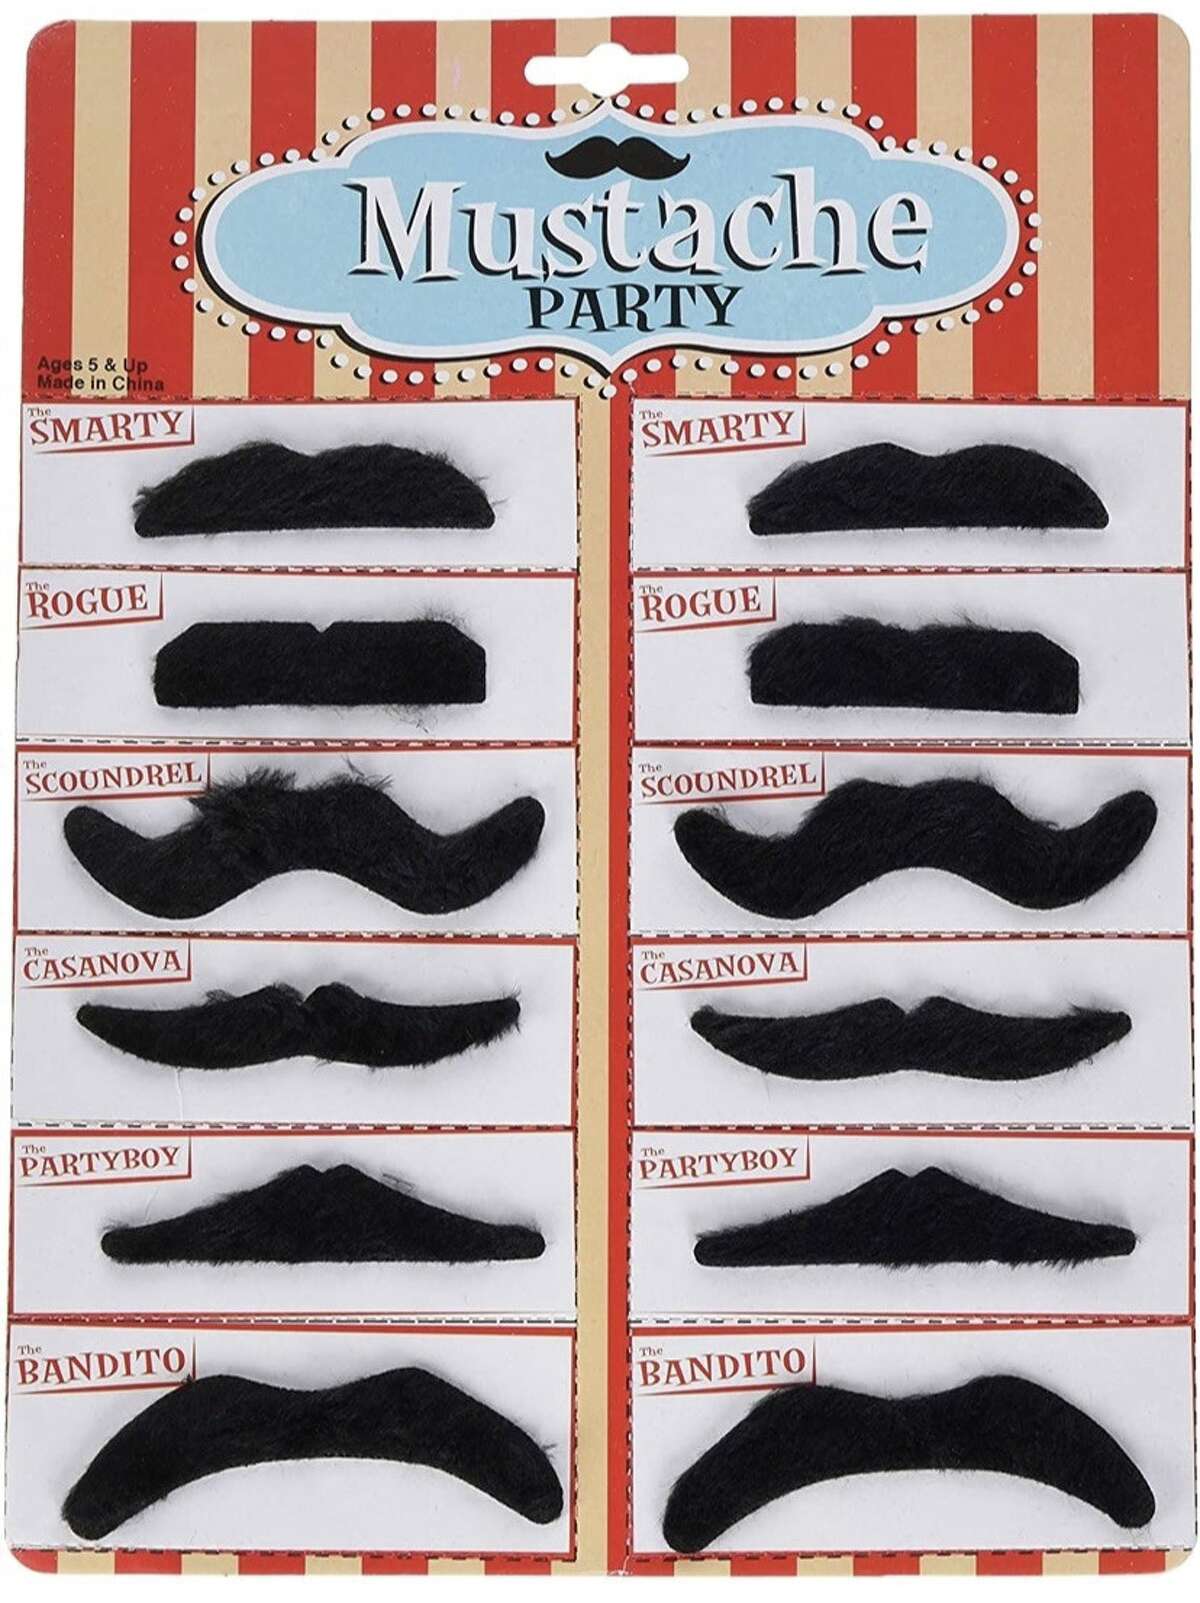 3. I sometimes shop in my sleep. I’ve bought everything from sundresses to rugs, but the weirdest thing I’ve ever sleep-purchased was hundreds of stick-on mustaches, which embarrassingly were delivered to Albany Law School.